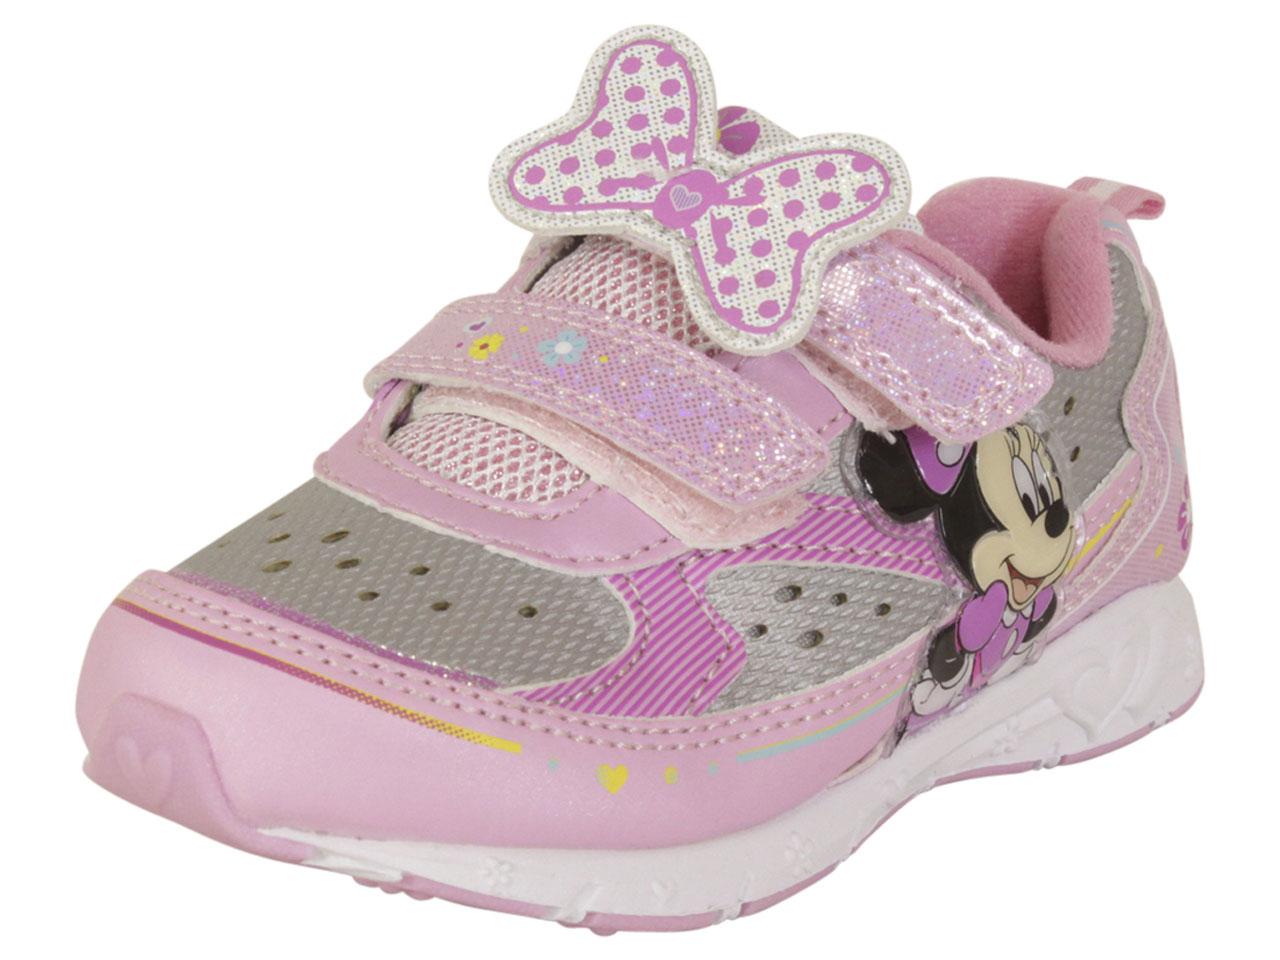 Minnie Mouse Light Up Sneakers Shoes